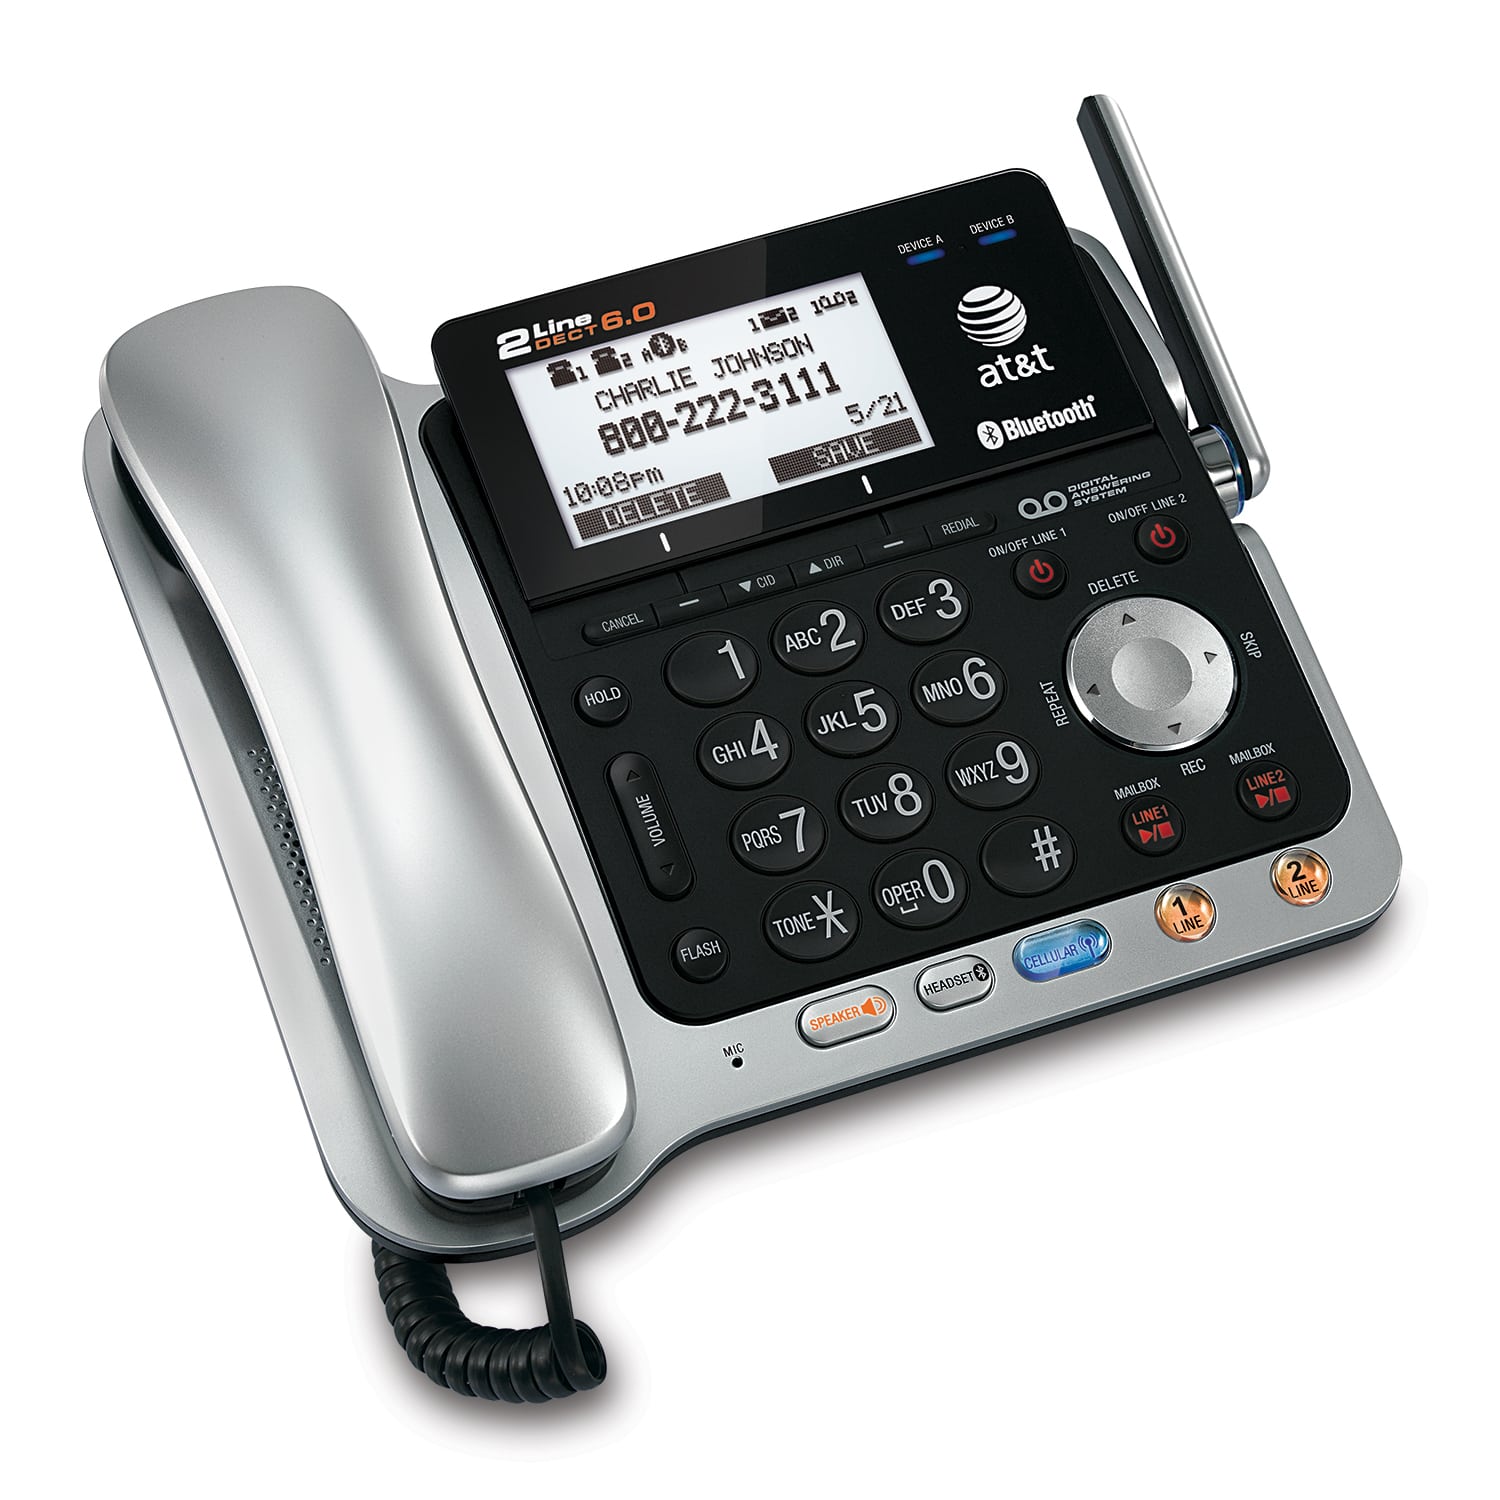 2-line 3 handset Connect to Cell™ corded/cordless answering system with caller ID/call waiting - view 3